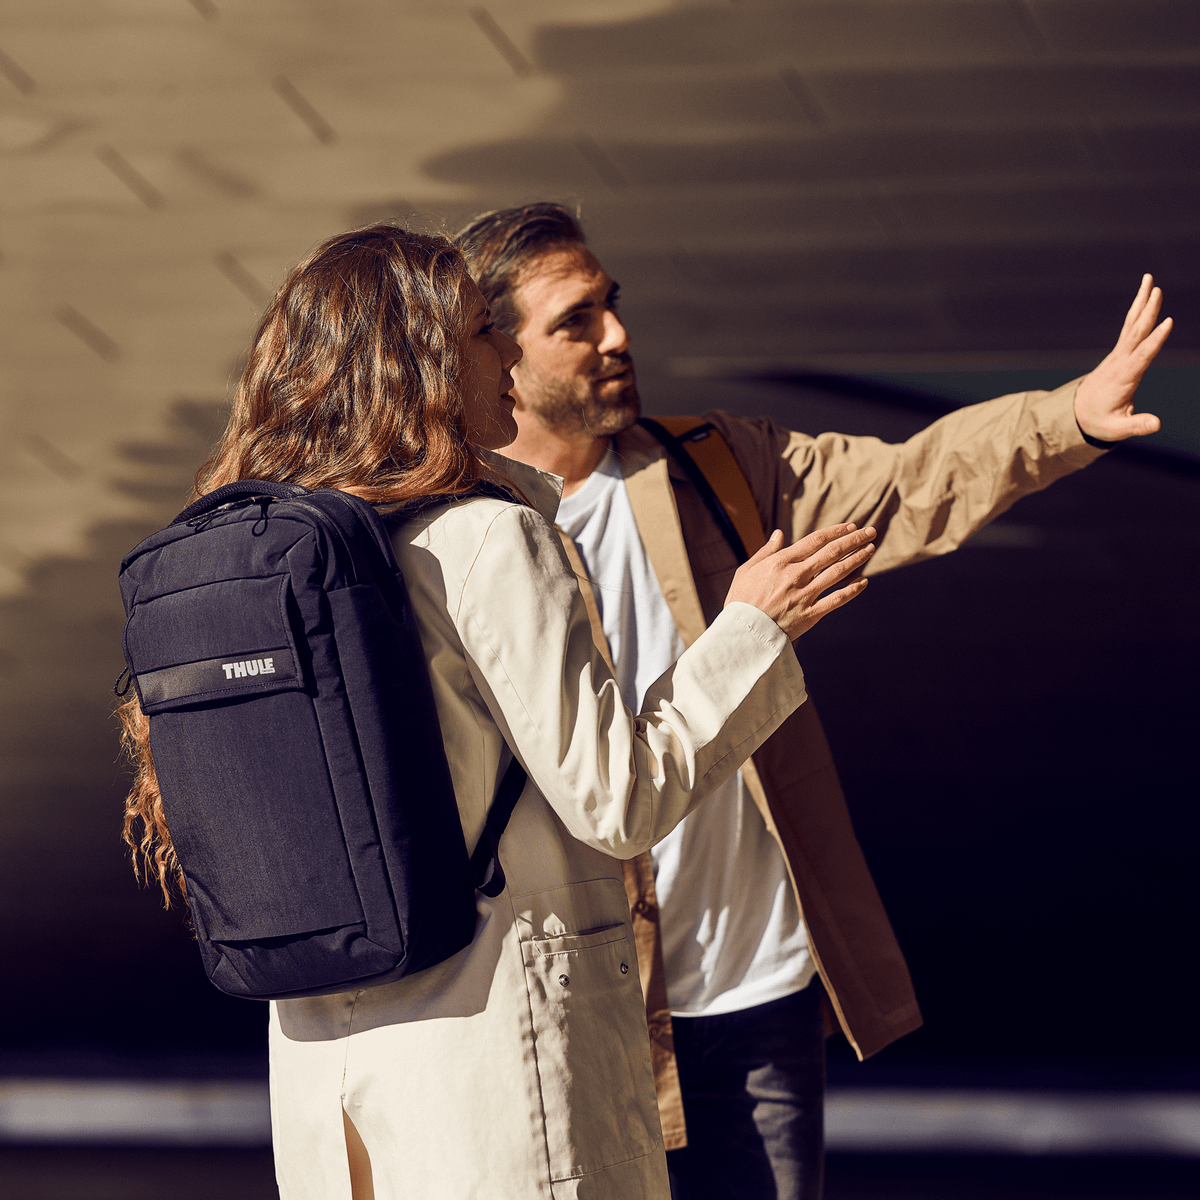 Two people point into the distance, one carrying a Thule Paramount Convertible Laptop Bag.